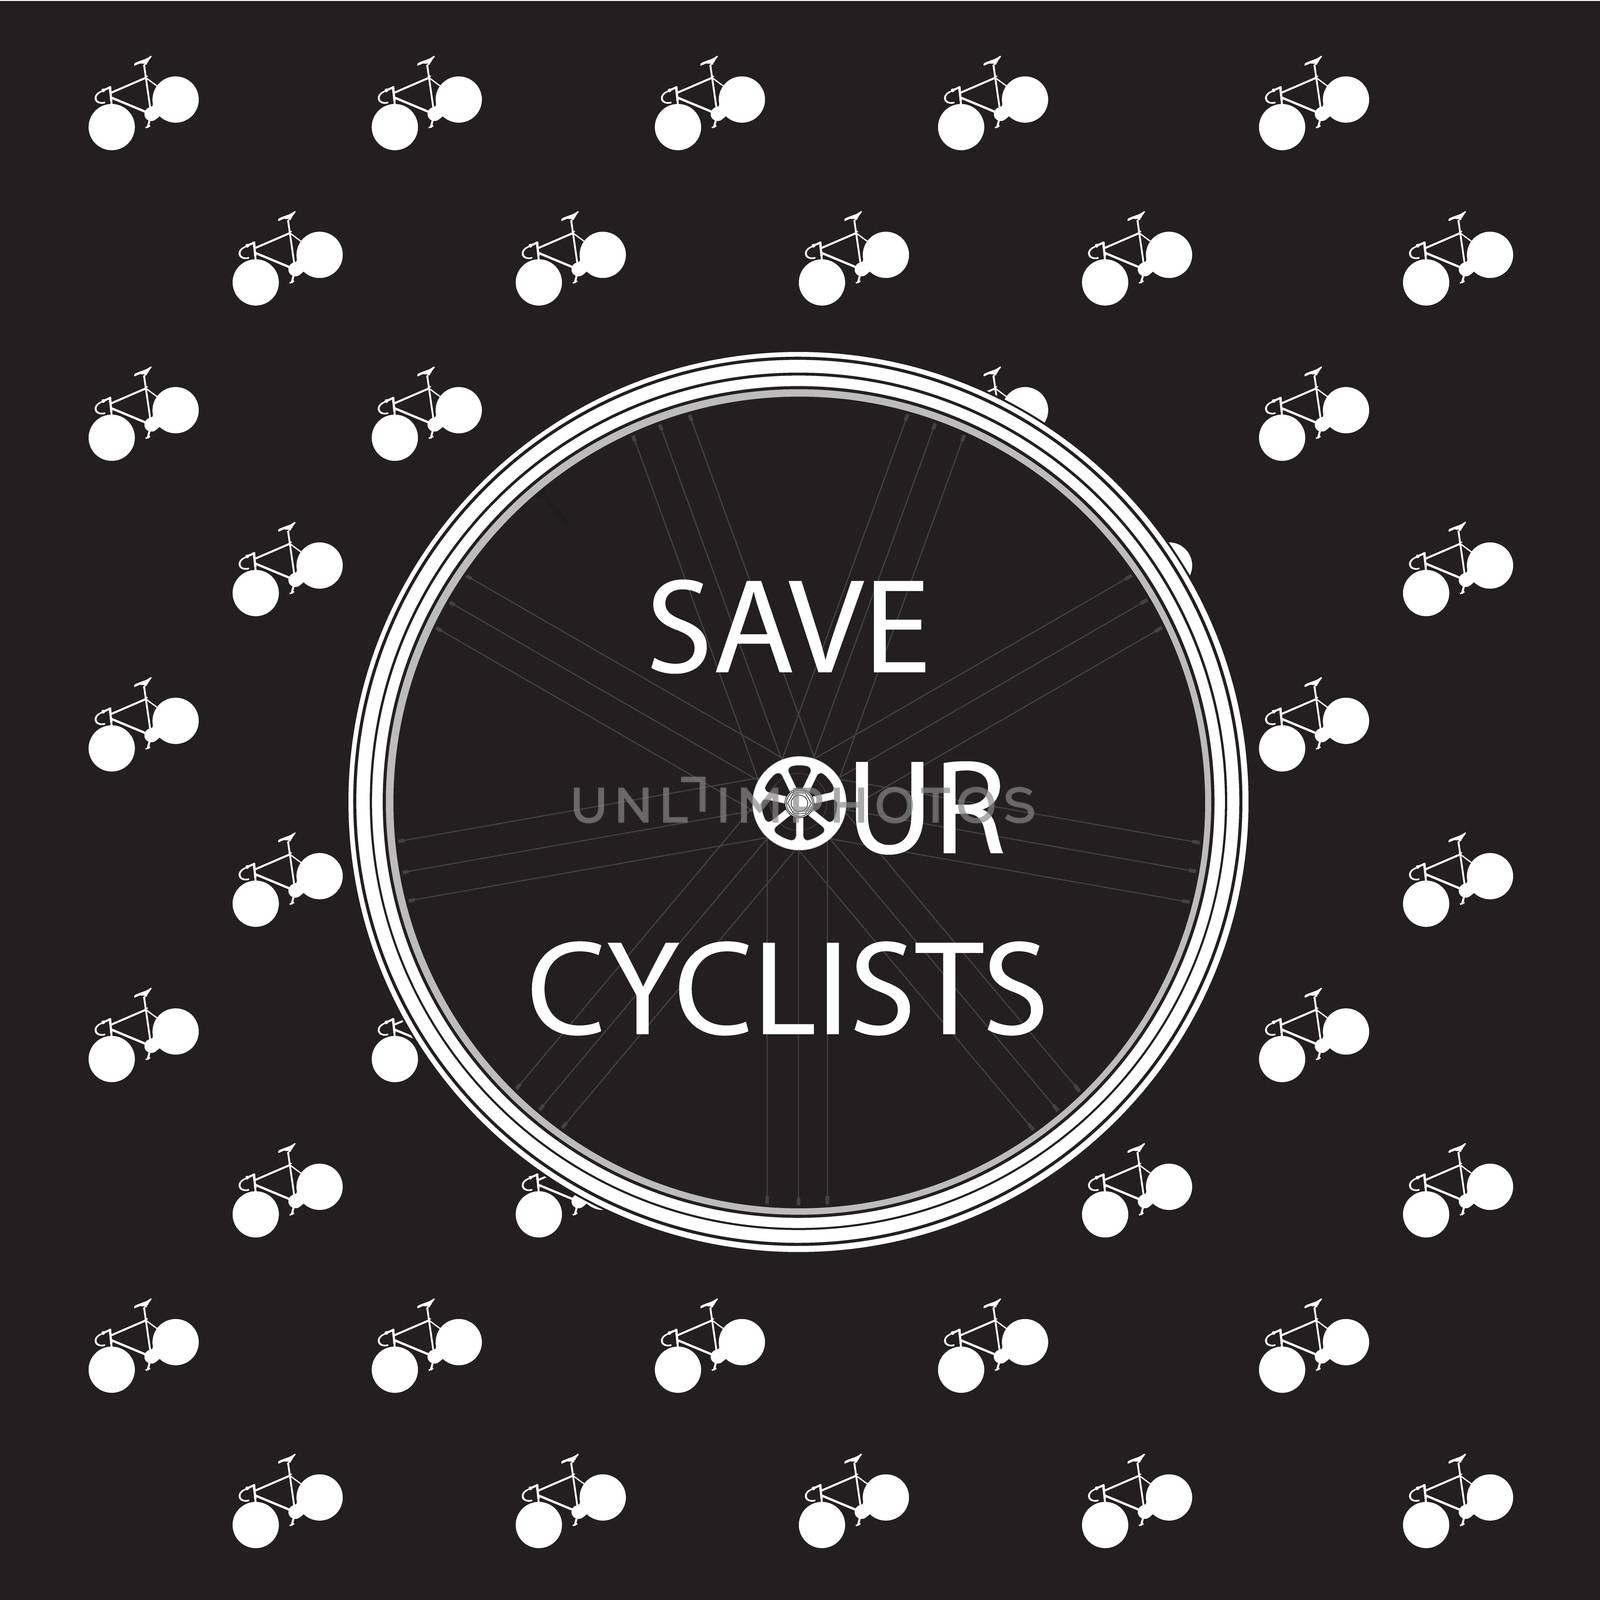 Save Our Cyclists Black Edition by landscafe